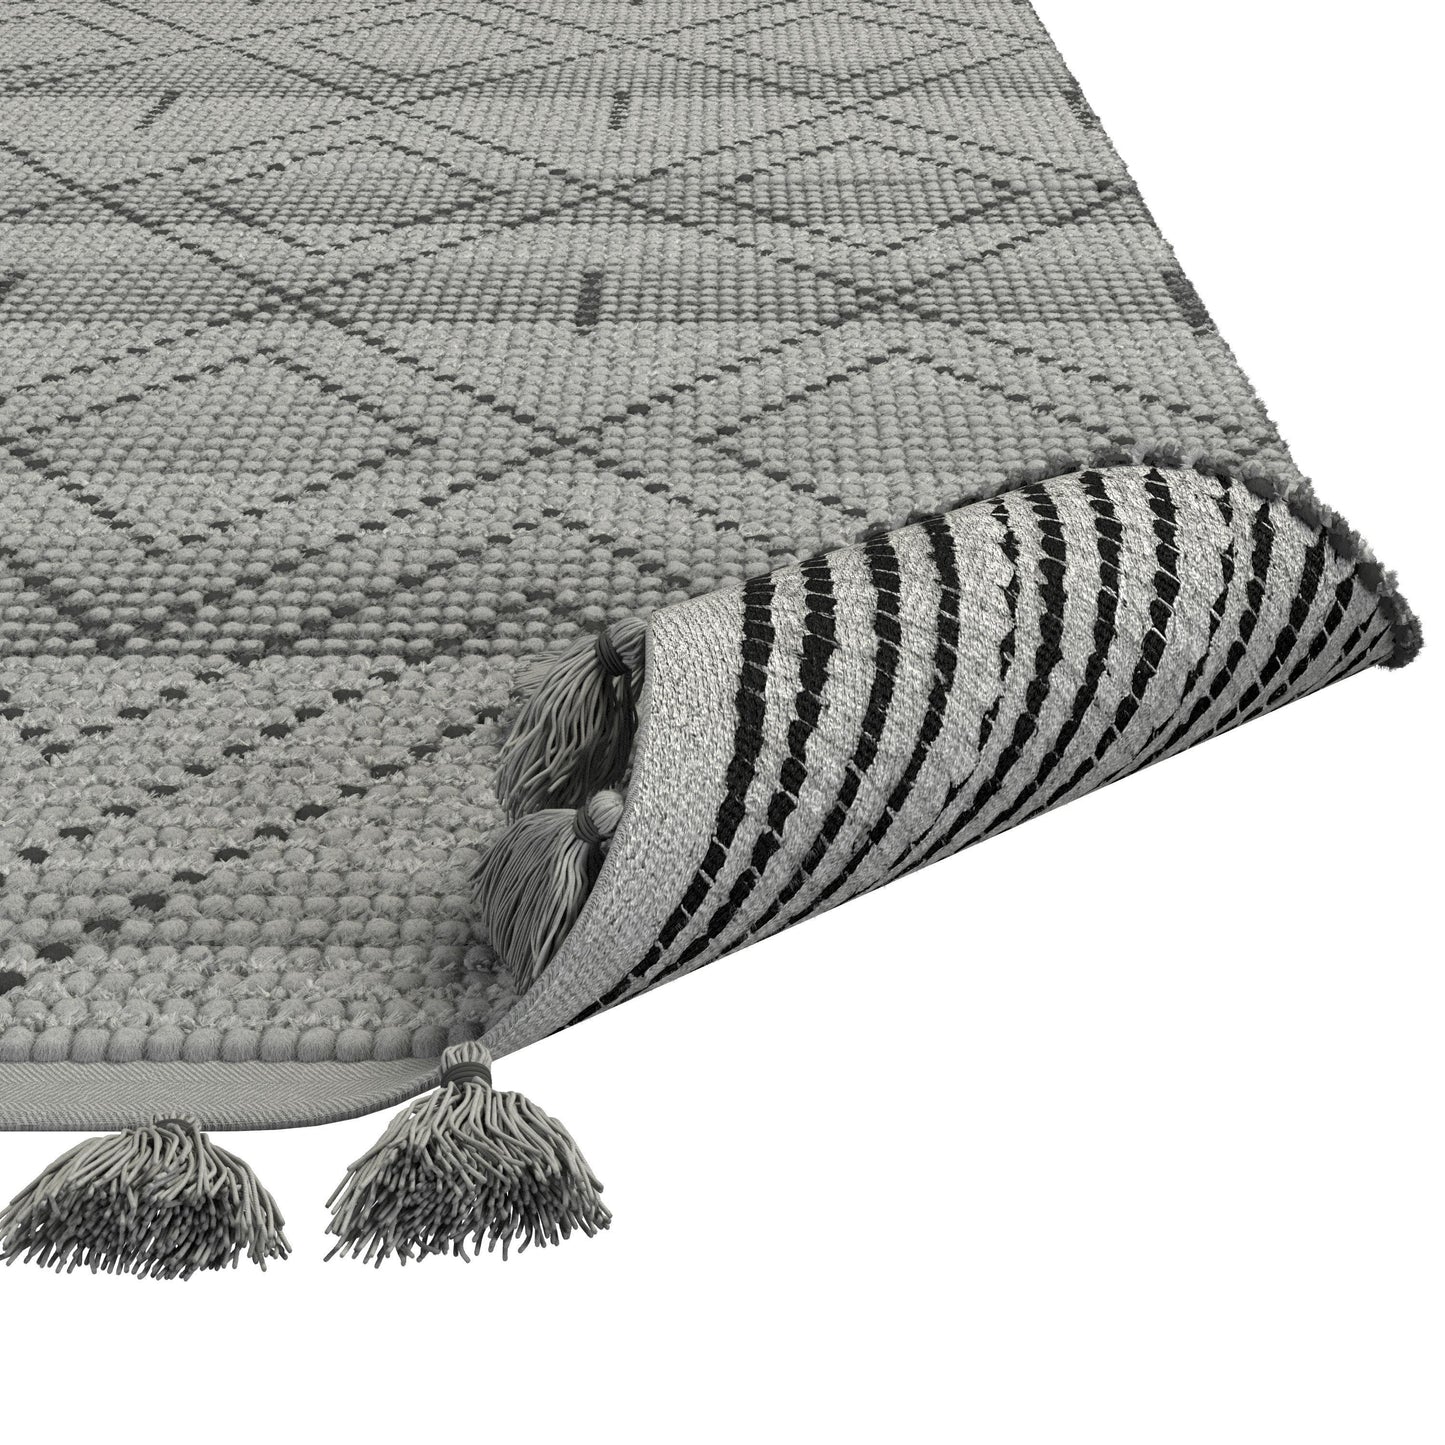 Vail Dowlan Gray and Charcoal Area Rug with Tassels 5x8